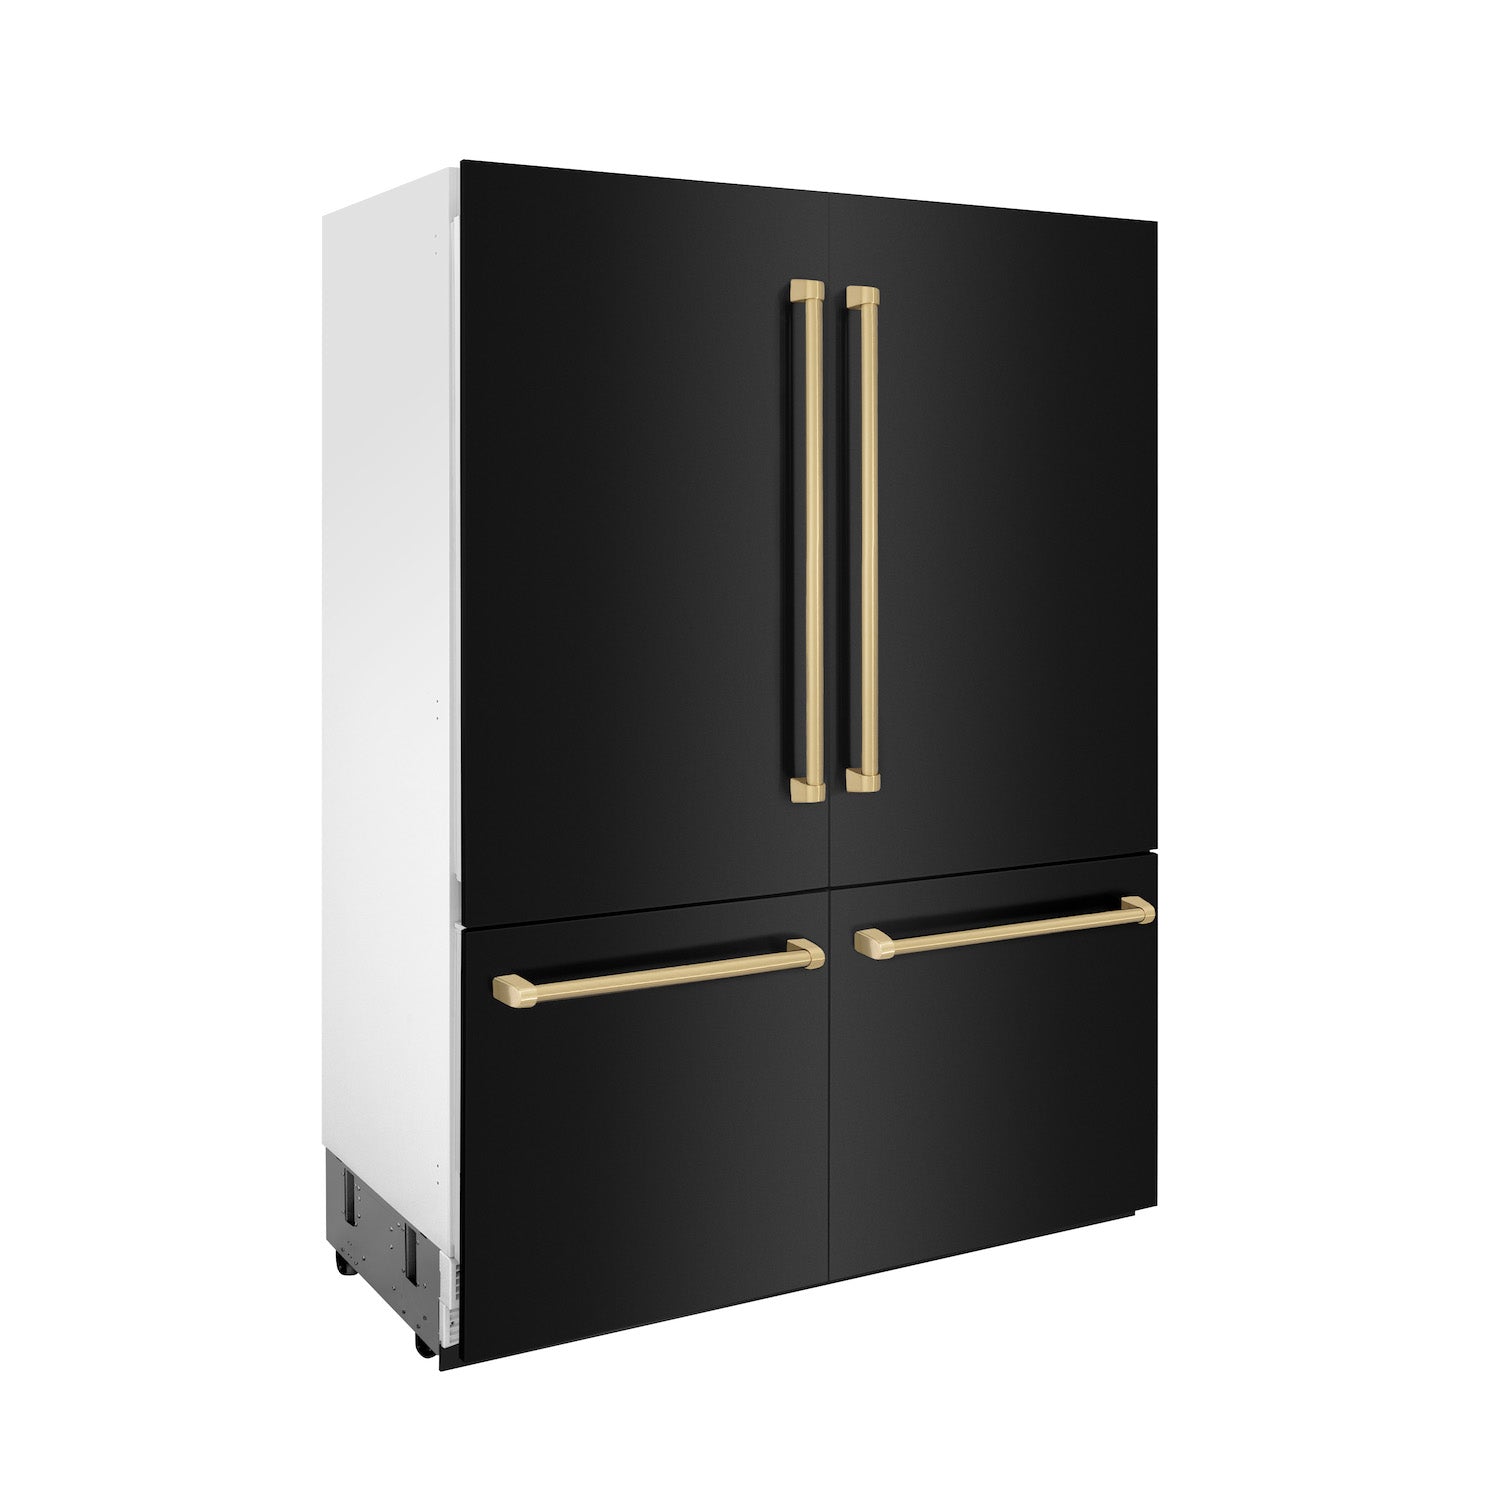 ZLINE 60" Autograph Edition Built-in French Door Refrigerator in Black Stainless Steel with Champagne Bronze Accents side.